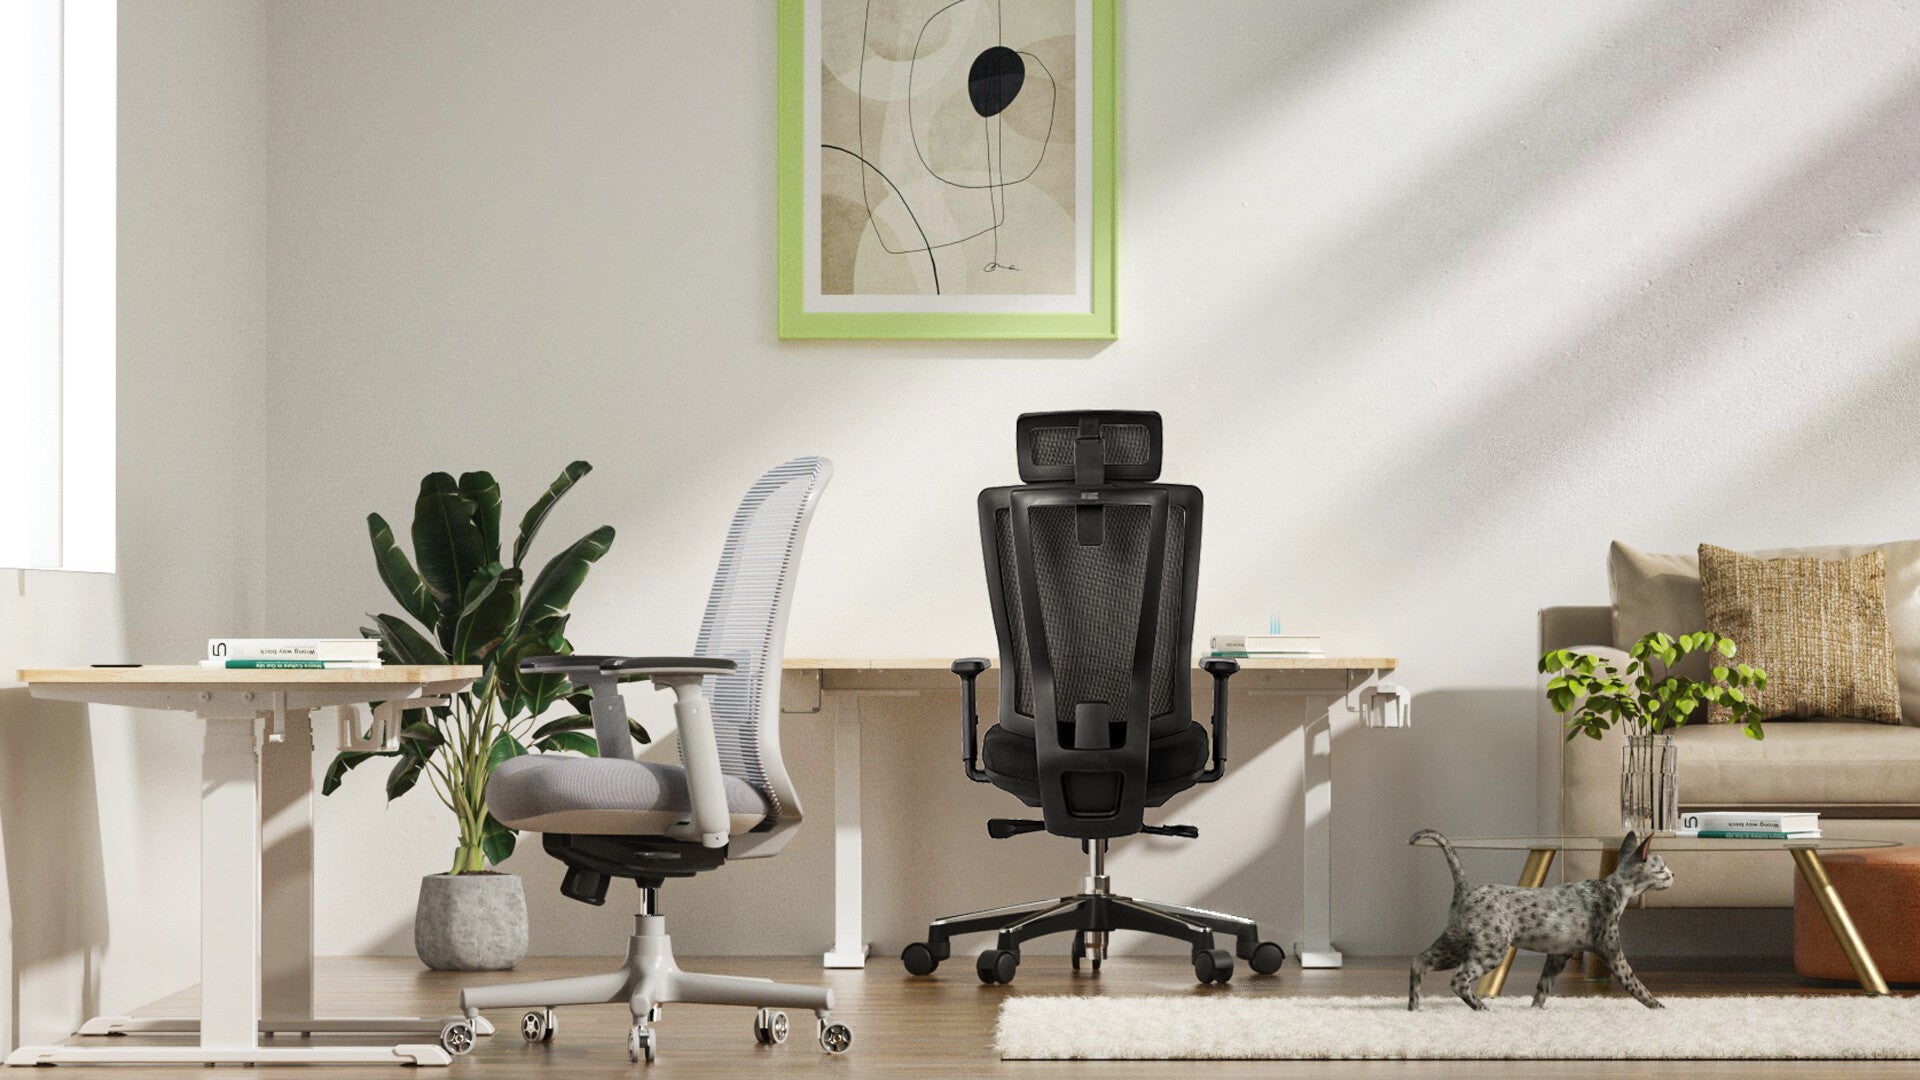 Best Affordable Ergonomic Chairs Available In The Market To Work From Home - odinlake